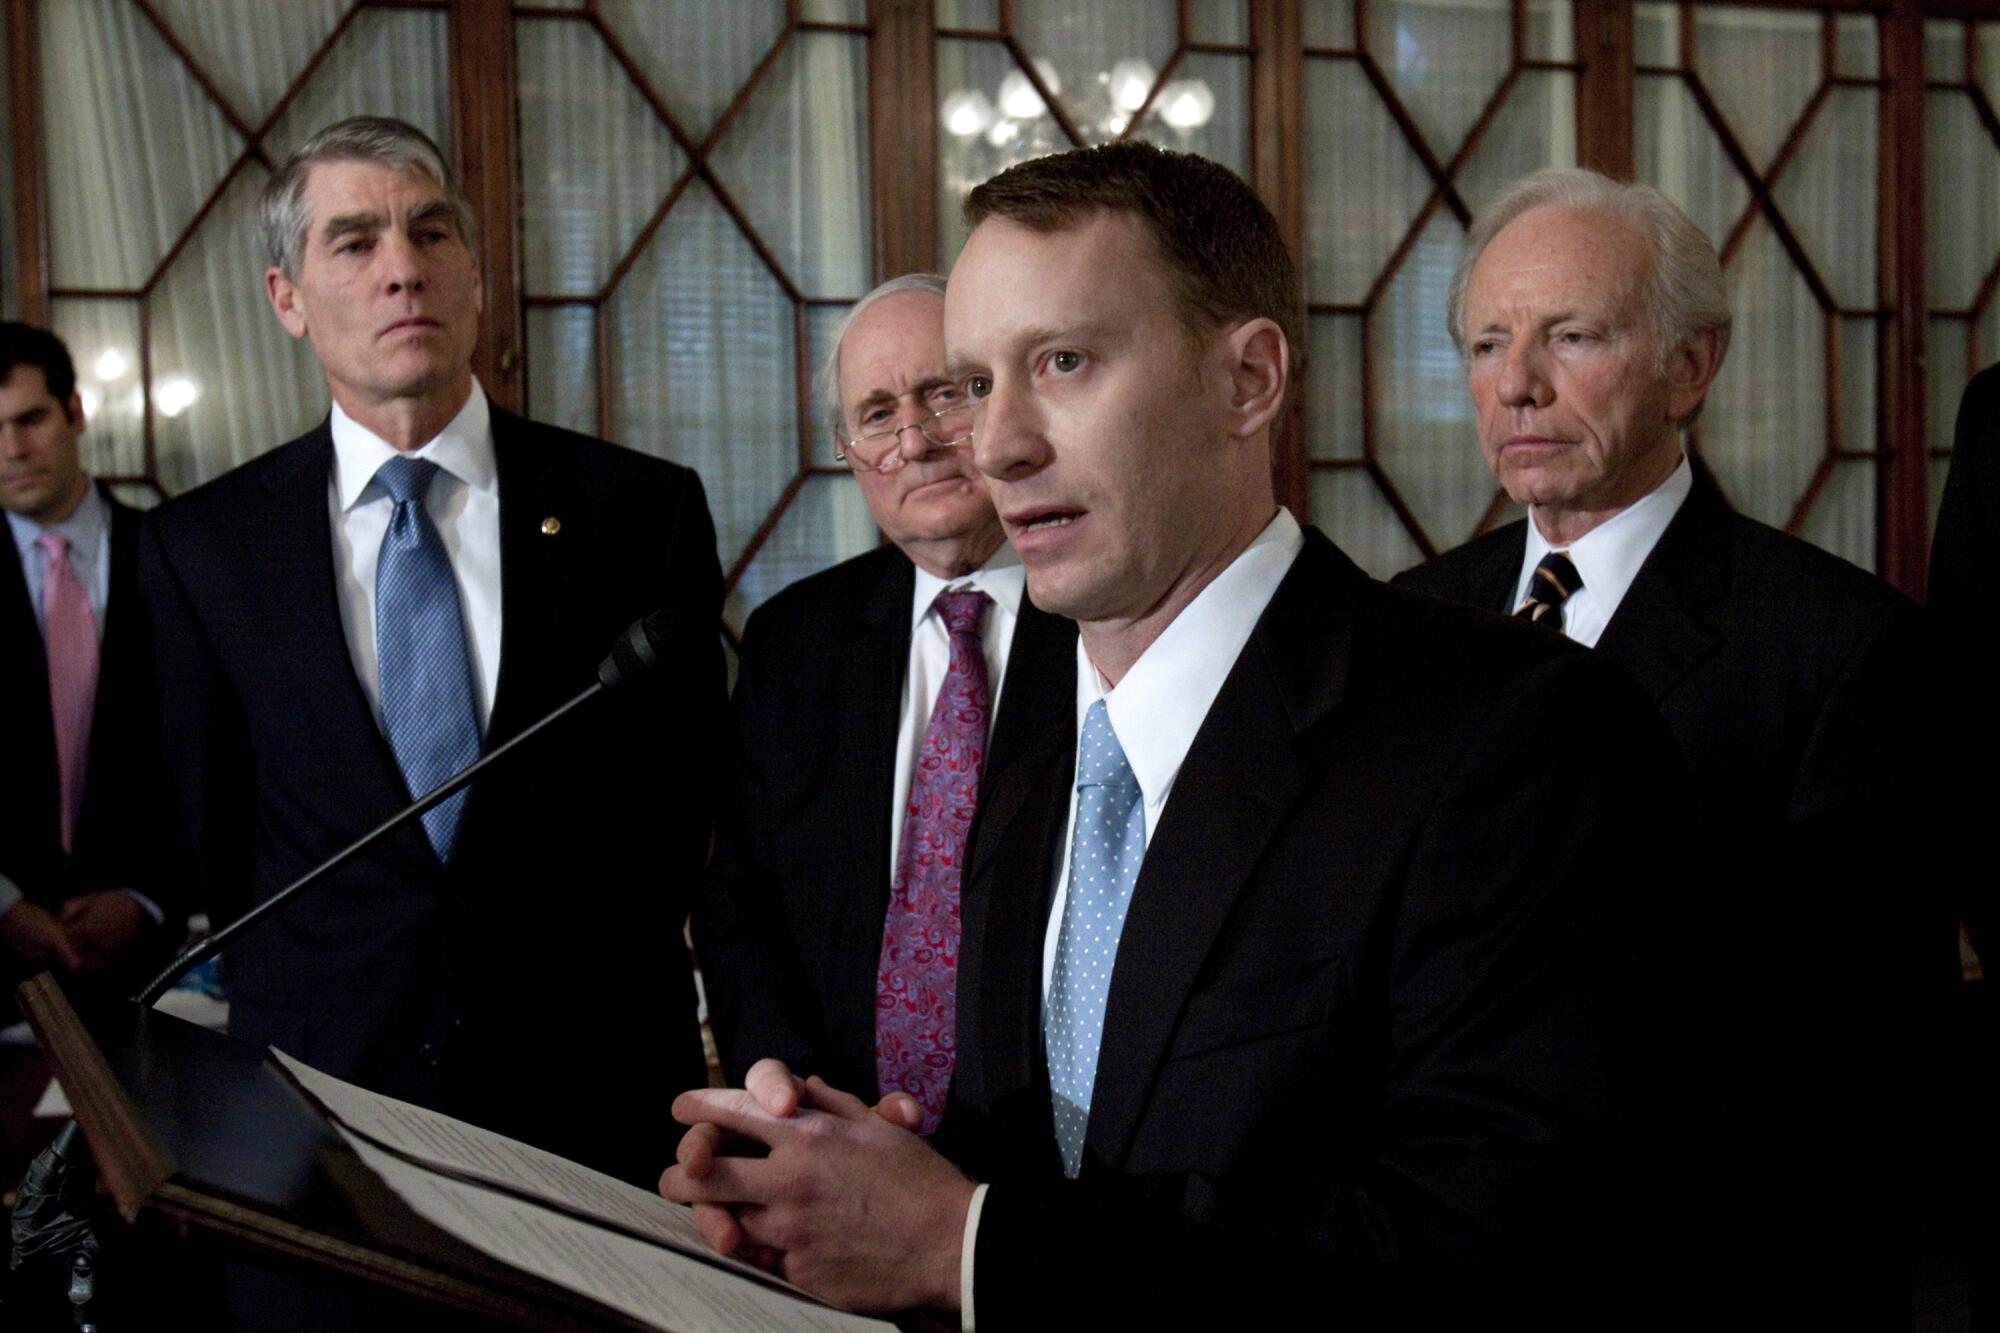 News conference on the introduction of a bill to repeal "don't ask, don't tell" on gays in the military on March 3, 2010.